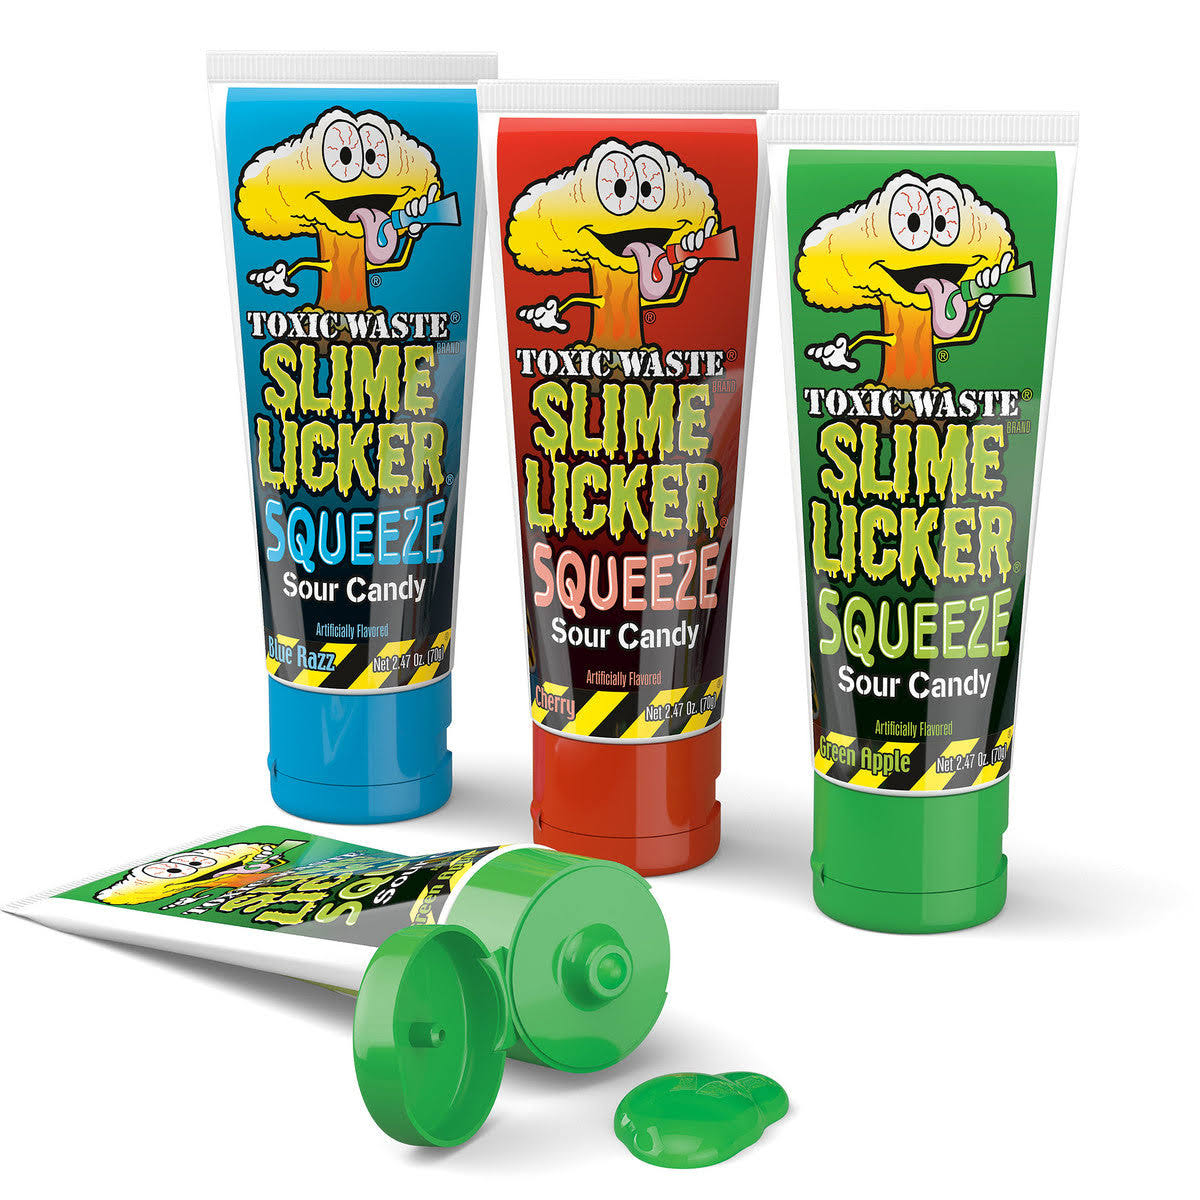 Toxic Waste Slime Licker Squeeze Sour Candy 70g